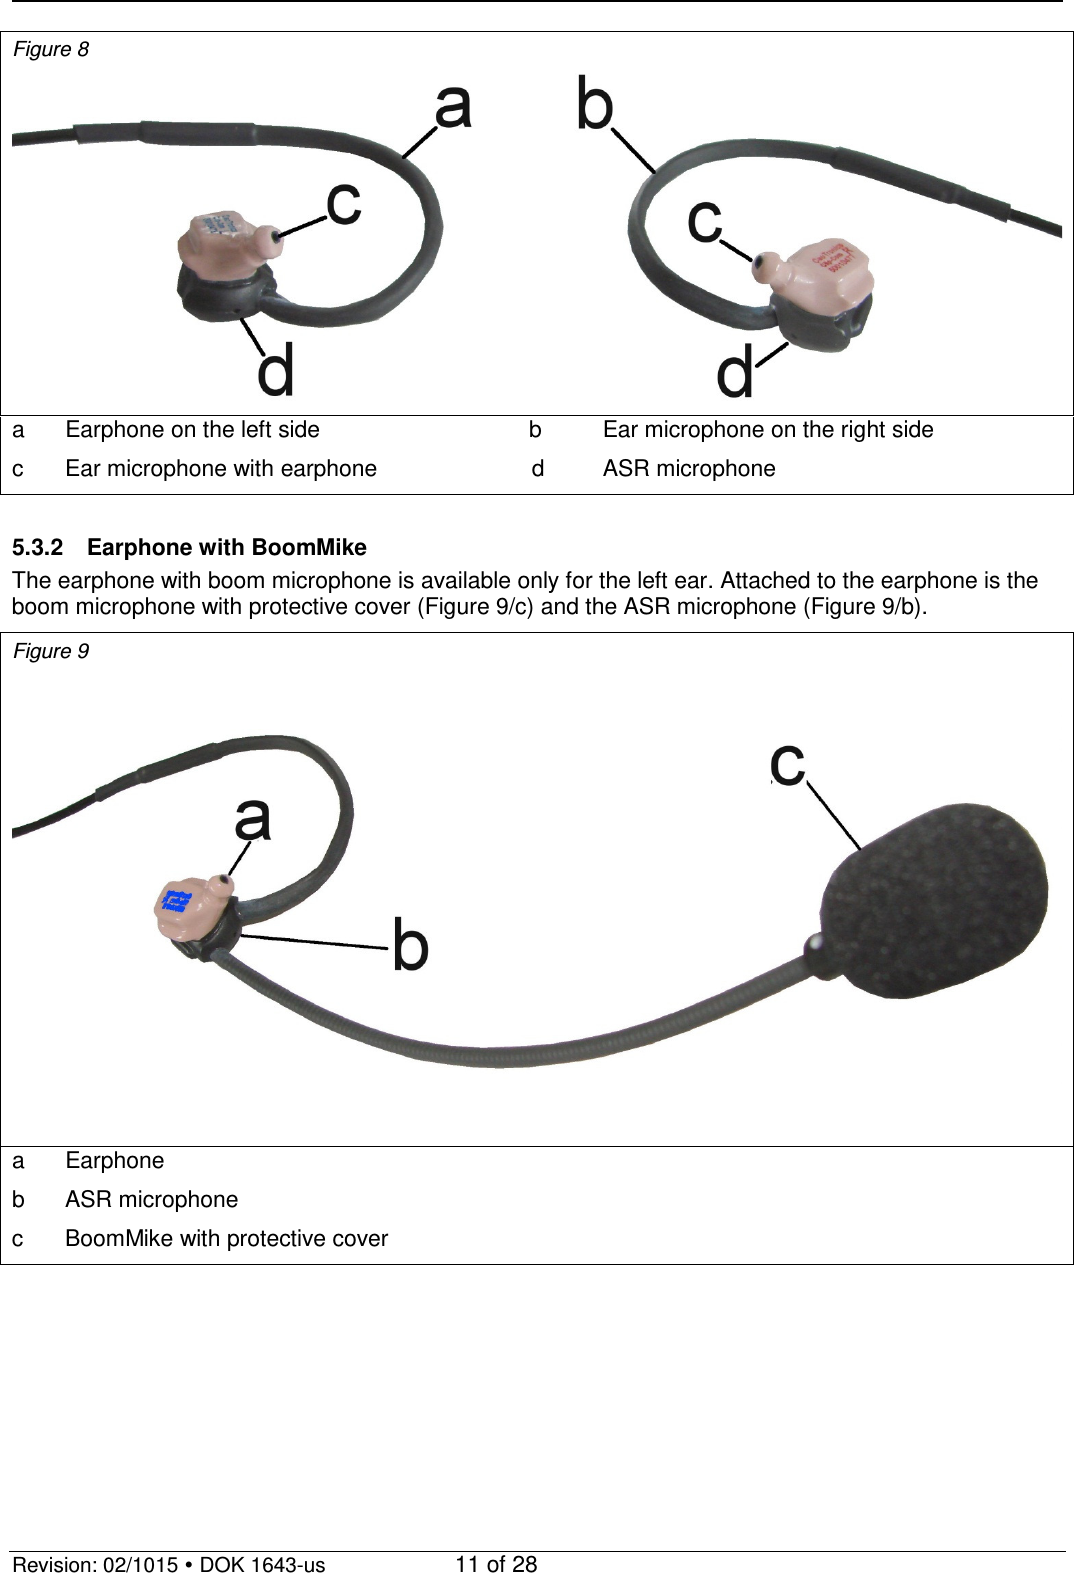   Revision: 02/1015  DOK 1643-us    11 of 28 Figure 8  a  Earphone on the left side      b  Ear microphone on the right side c  Ear microphone with earphone               d  ASR microphone  5.3.2 Earphone with BoomMike The earphone with boom microphone is available only for the left ear. Attached to the earphone is the boom microphone with protective cover (Figure 9/c) and the ASR microphone (Figure 9/b). Figure 9   a  Earphone b  ASR microphone c  BoomMike with protective cover   